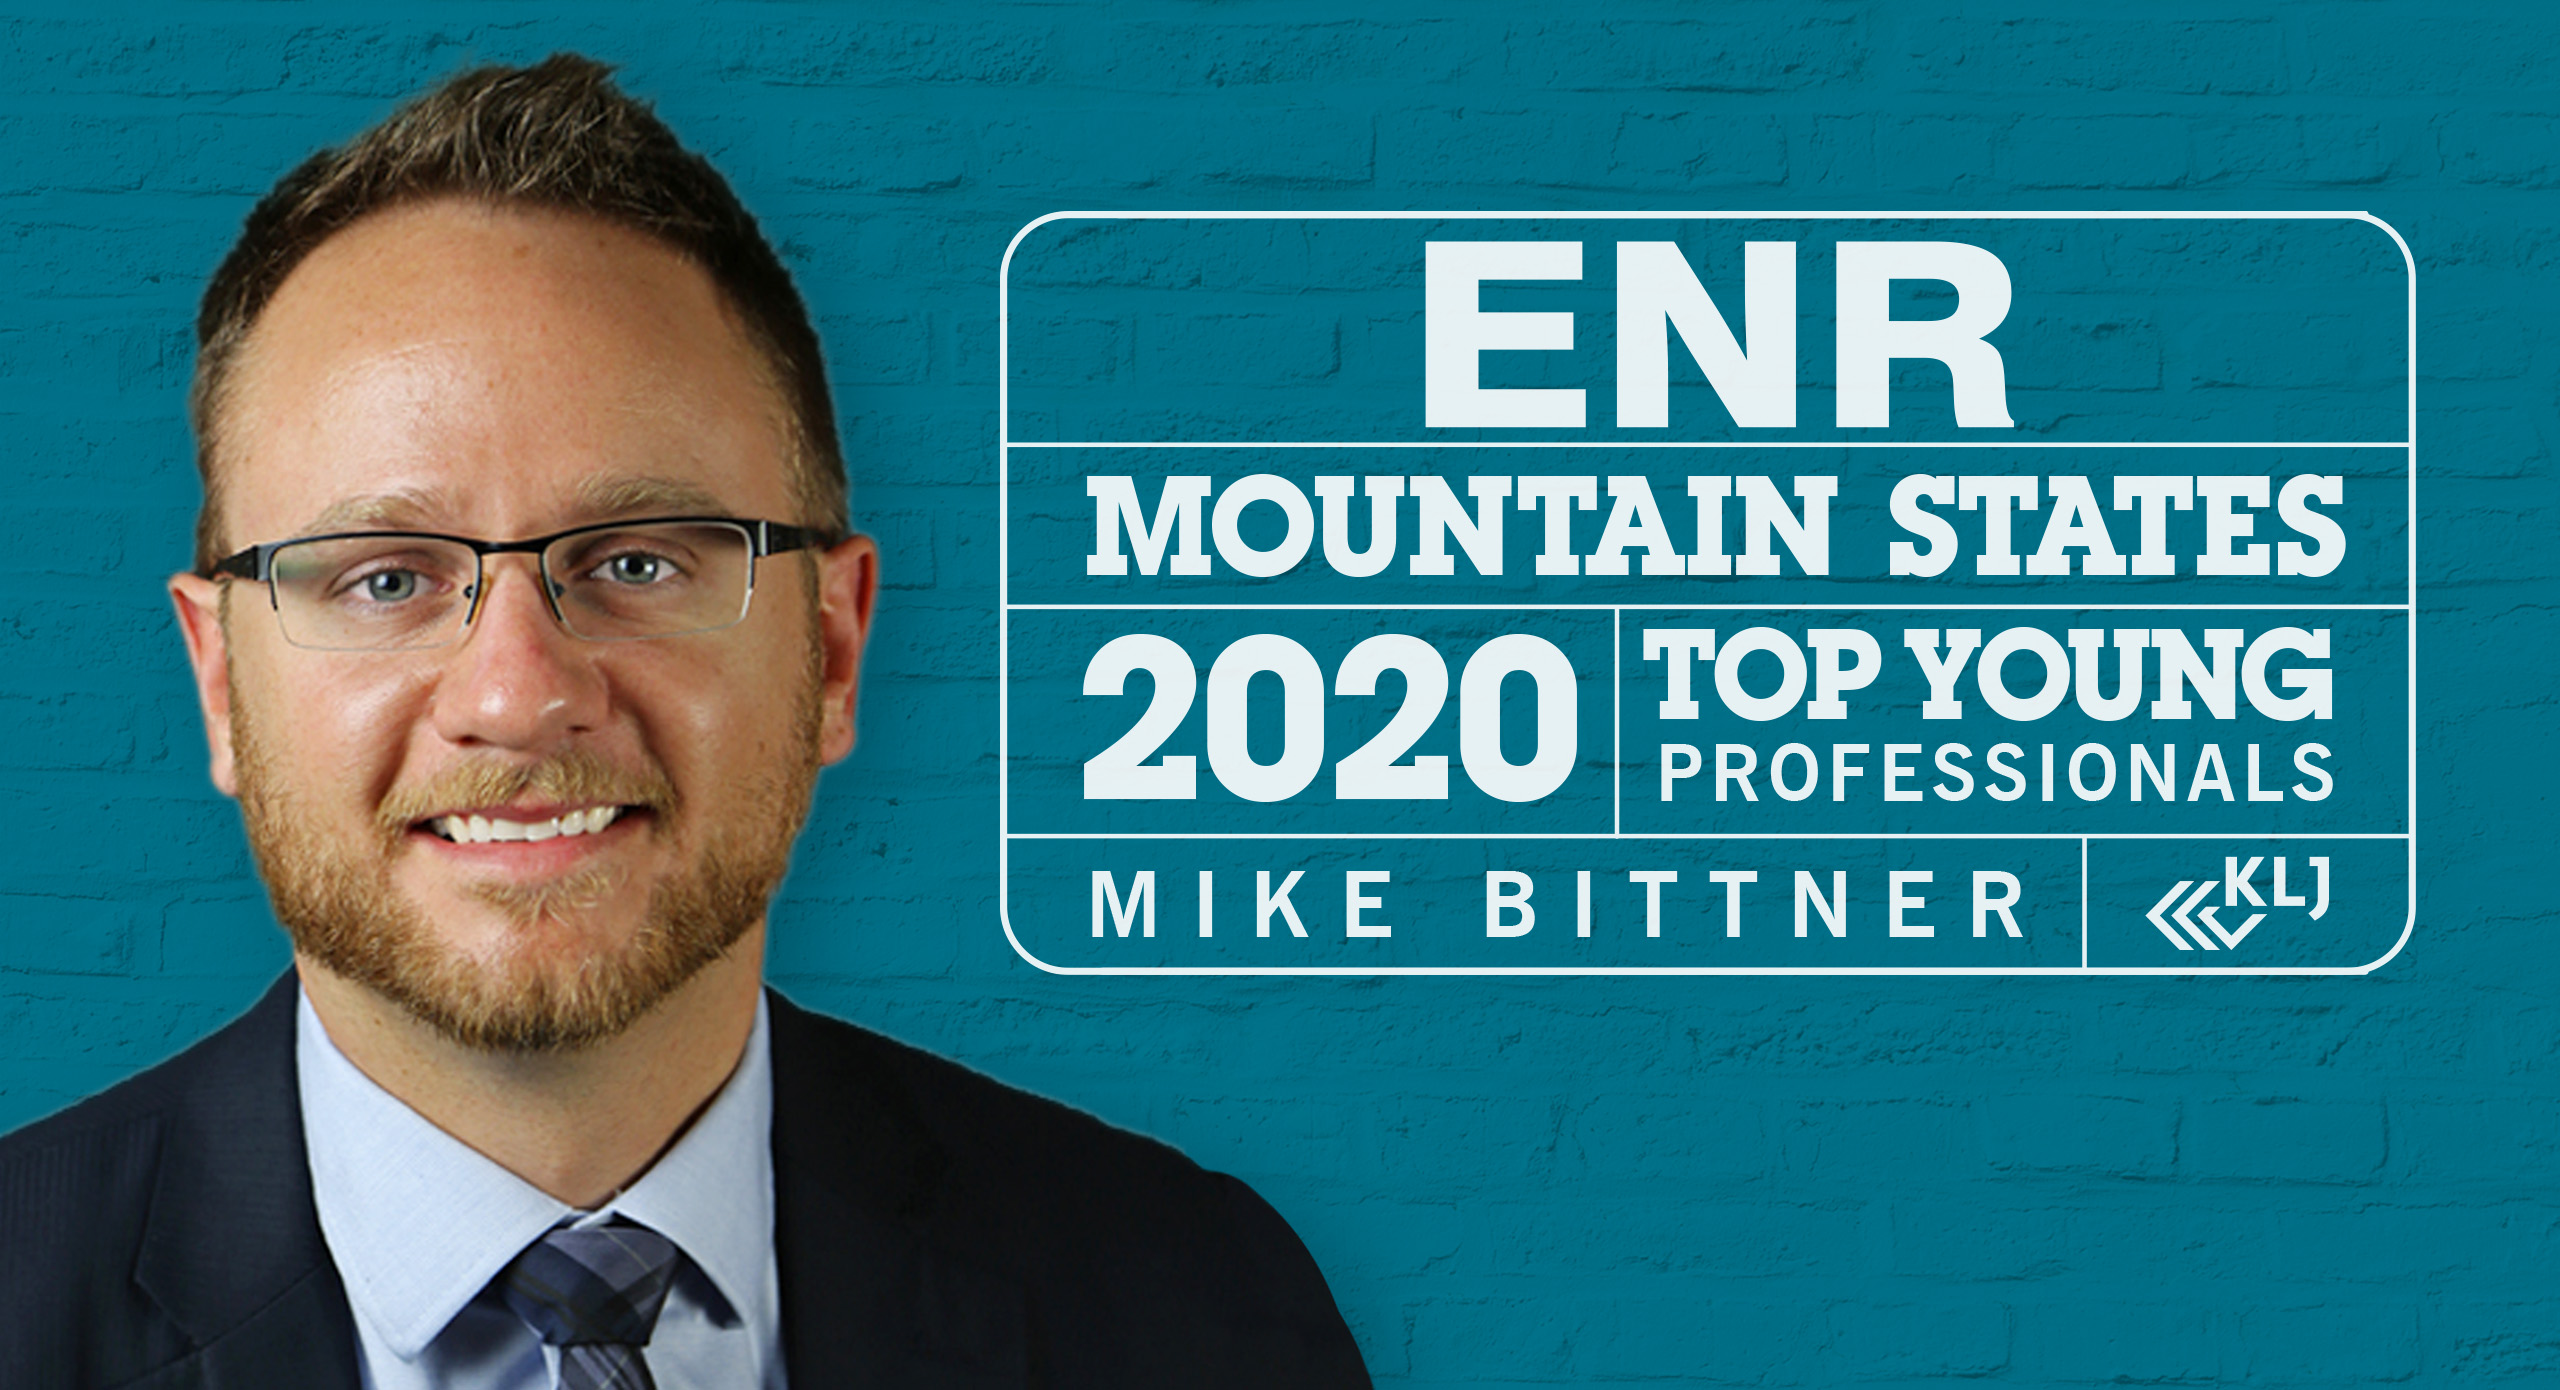 ENR Mountain States Names Bittner Among 2020 Top Young Professionals